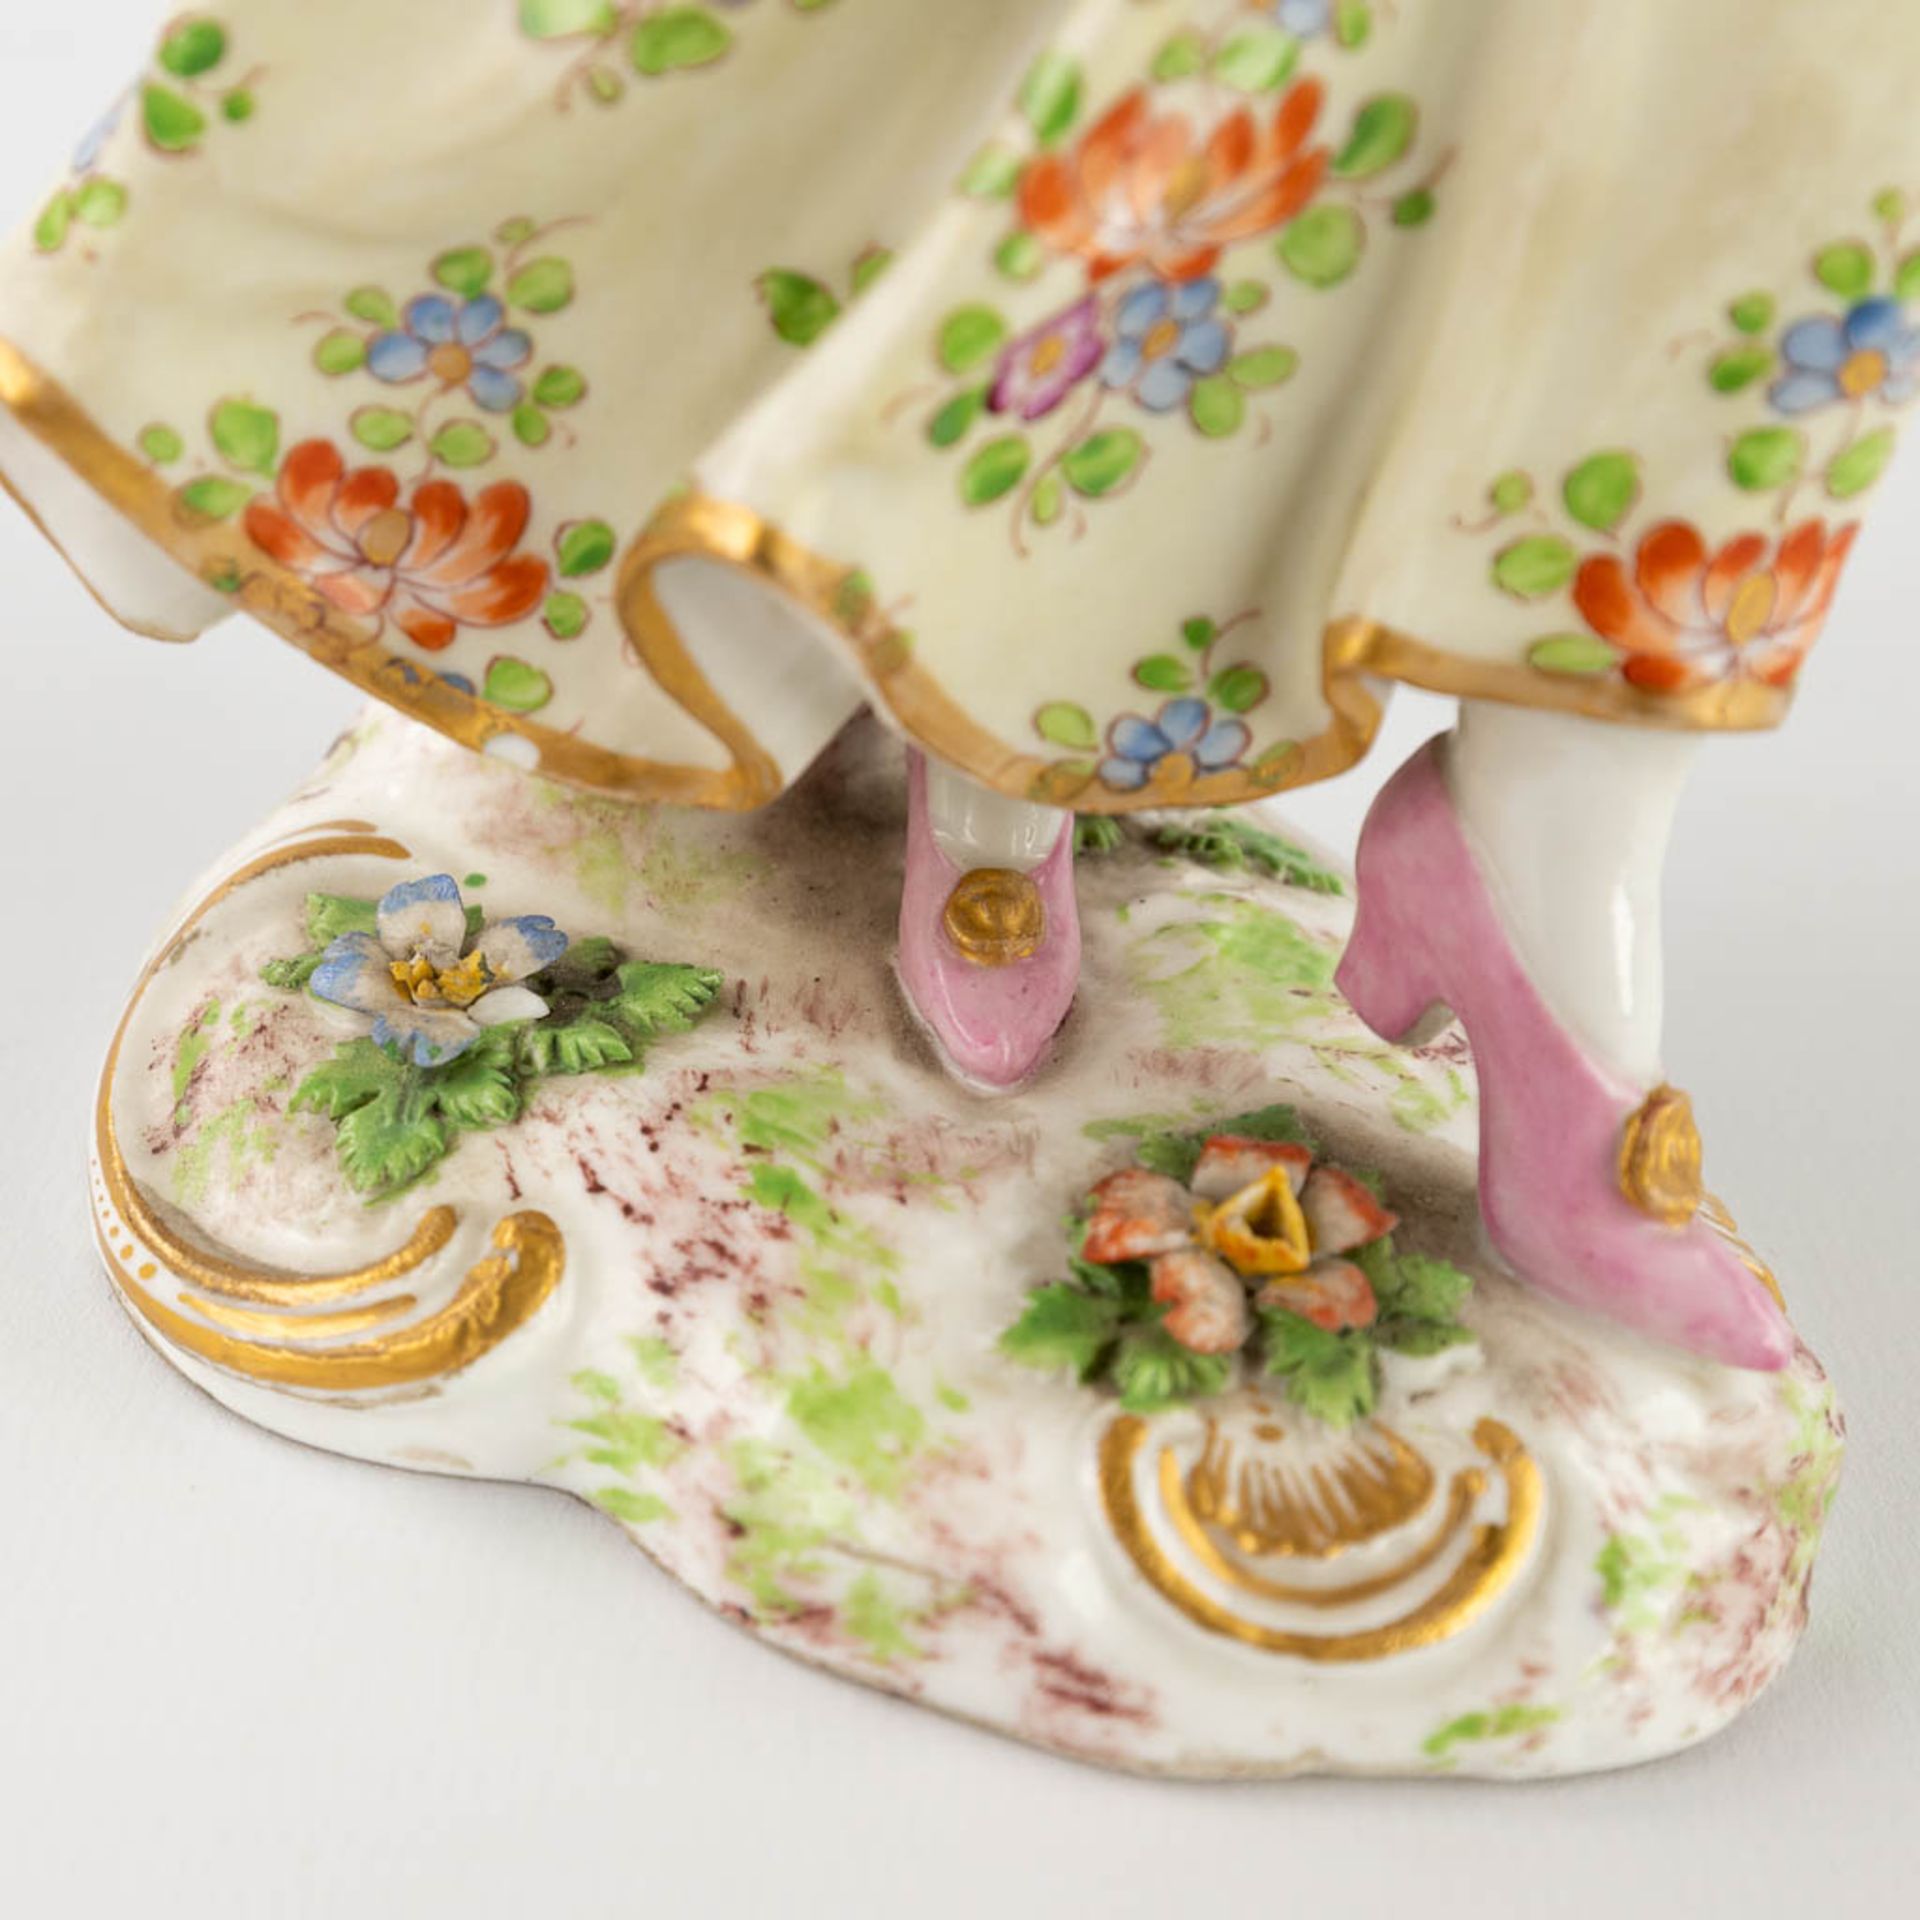 Meissen Porcelain mark, a dancing and musical couple. 19th C. (L:10 x W:14 x H:26 cm) - Image 10 of 20